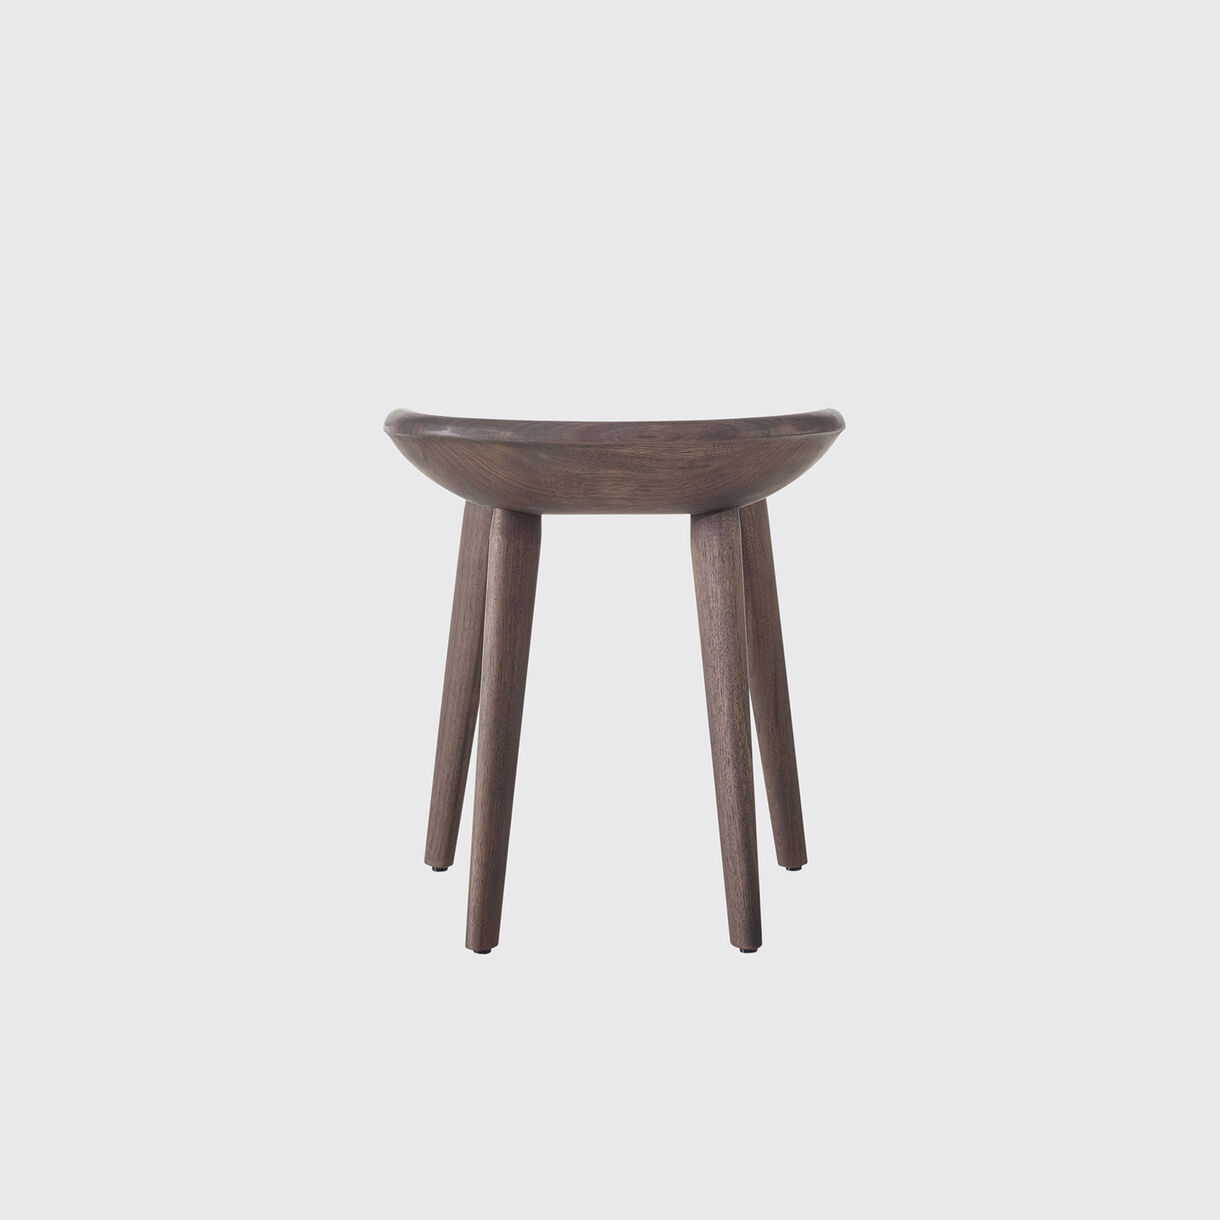 Tractor Stool, Low Stool Height, Walnut, Black Oiled